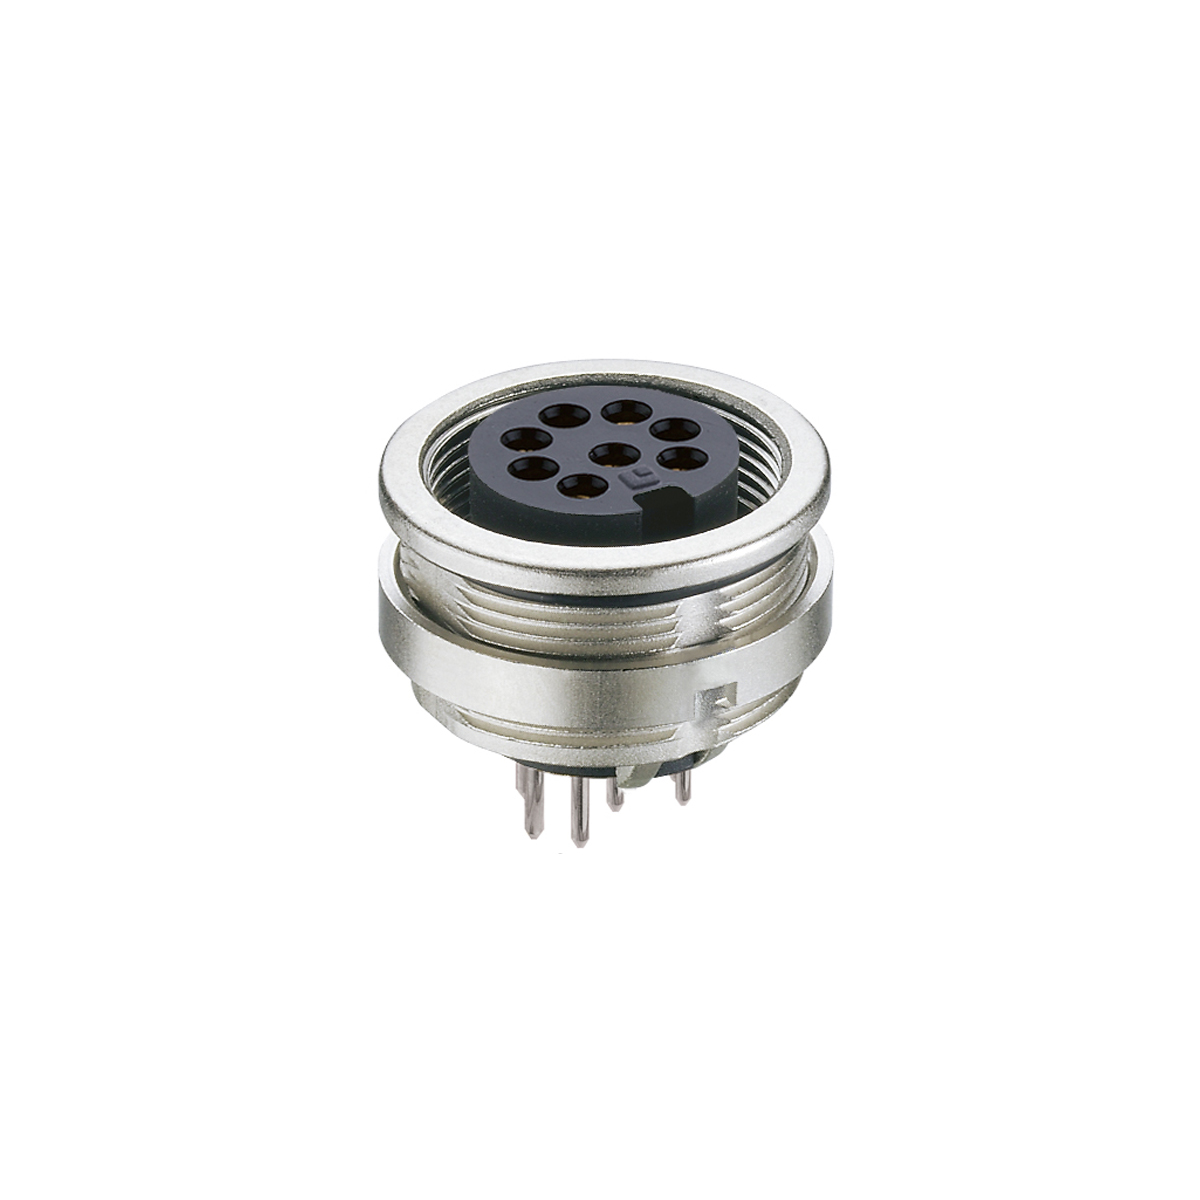 Lumberg: 0306-2 (Series 03 | Circular connectors with threaded joint M16 acc. to IEC 61076-2-106, IP40/IP68)